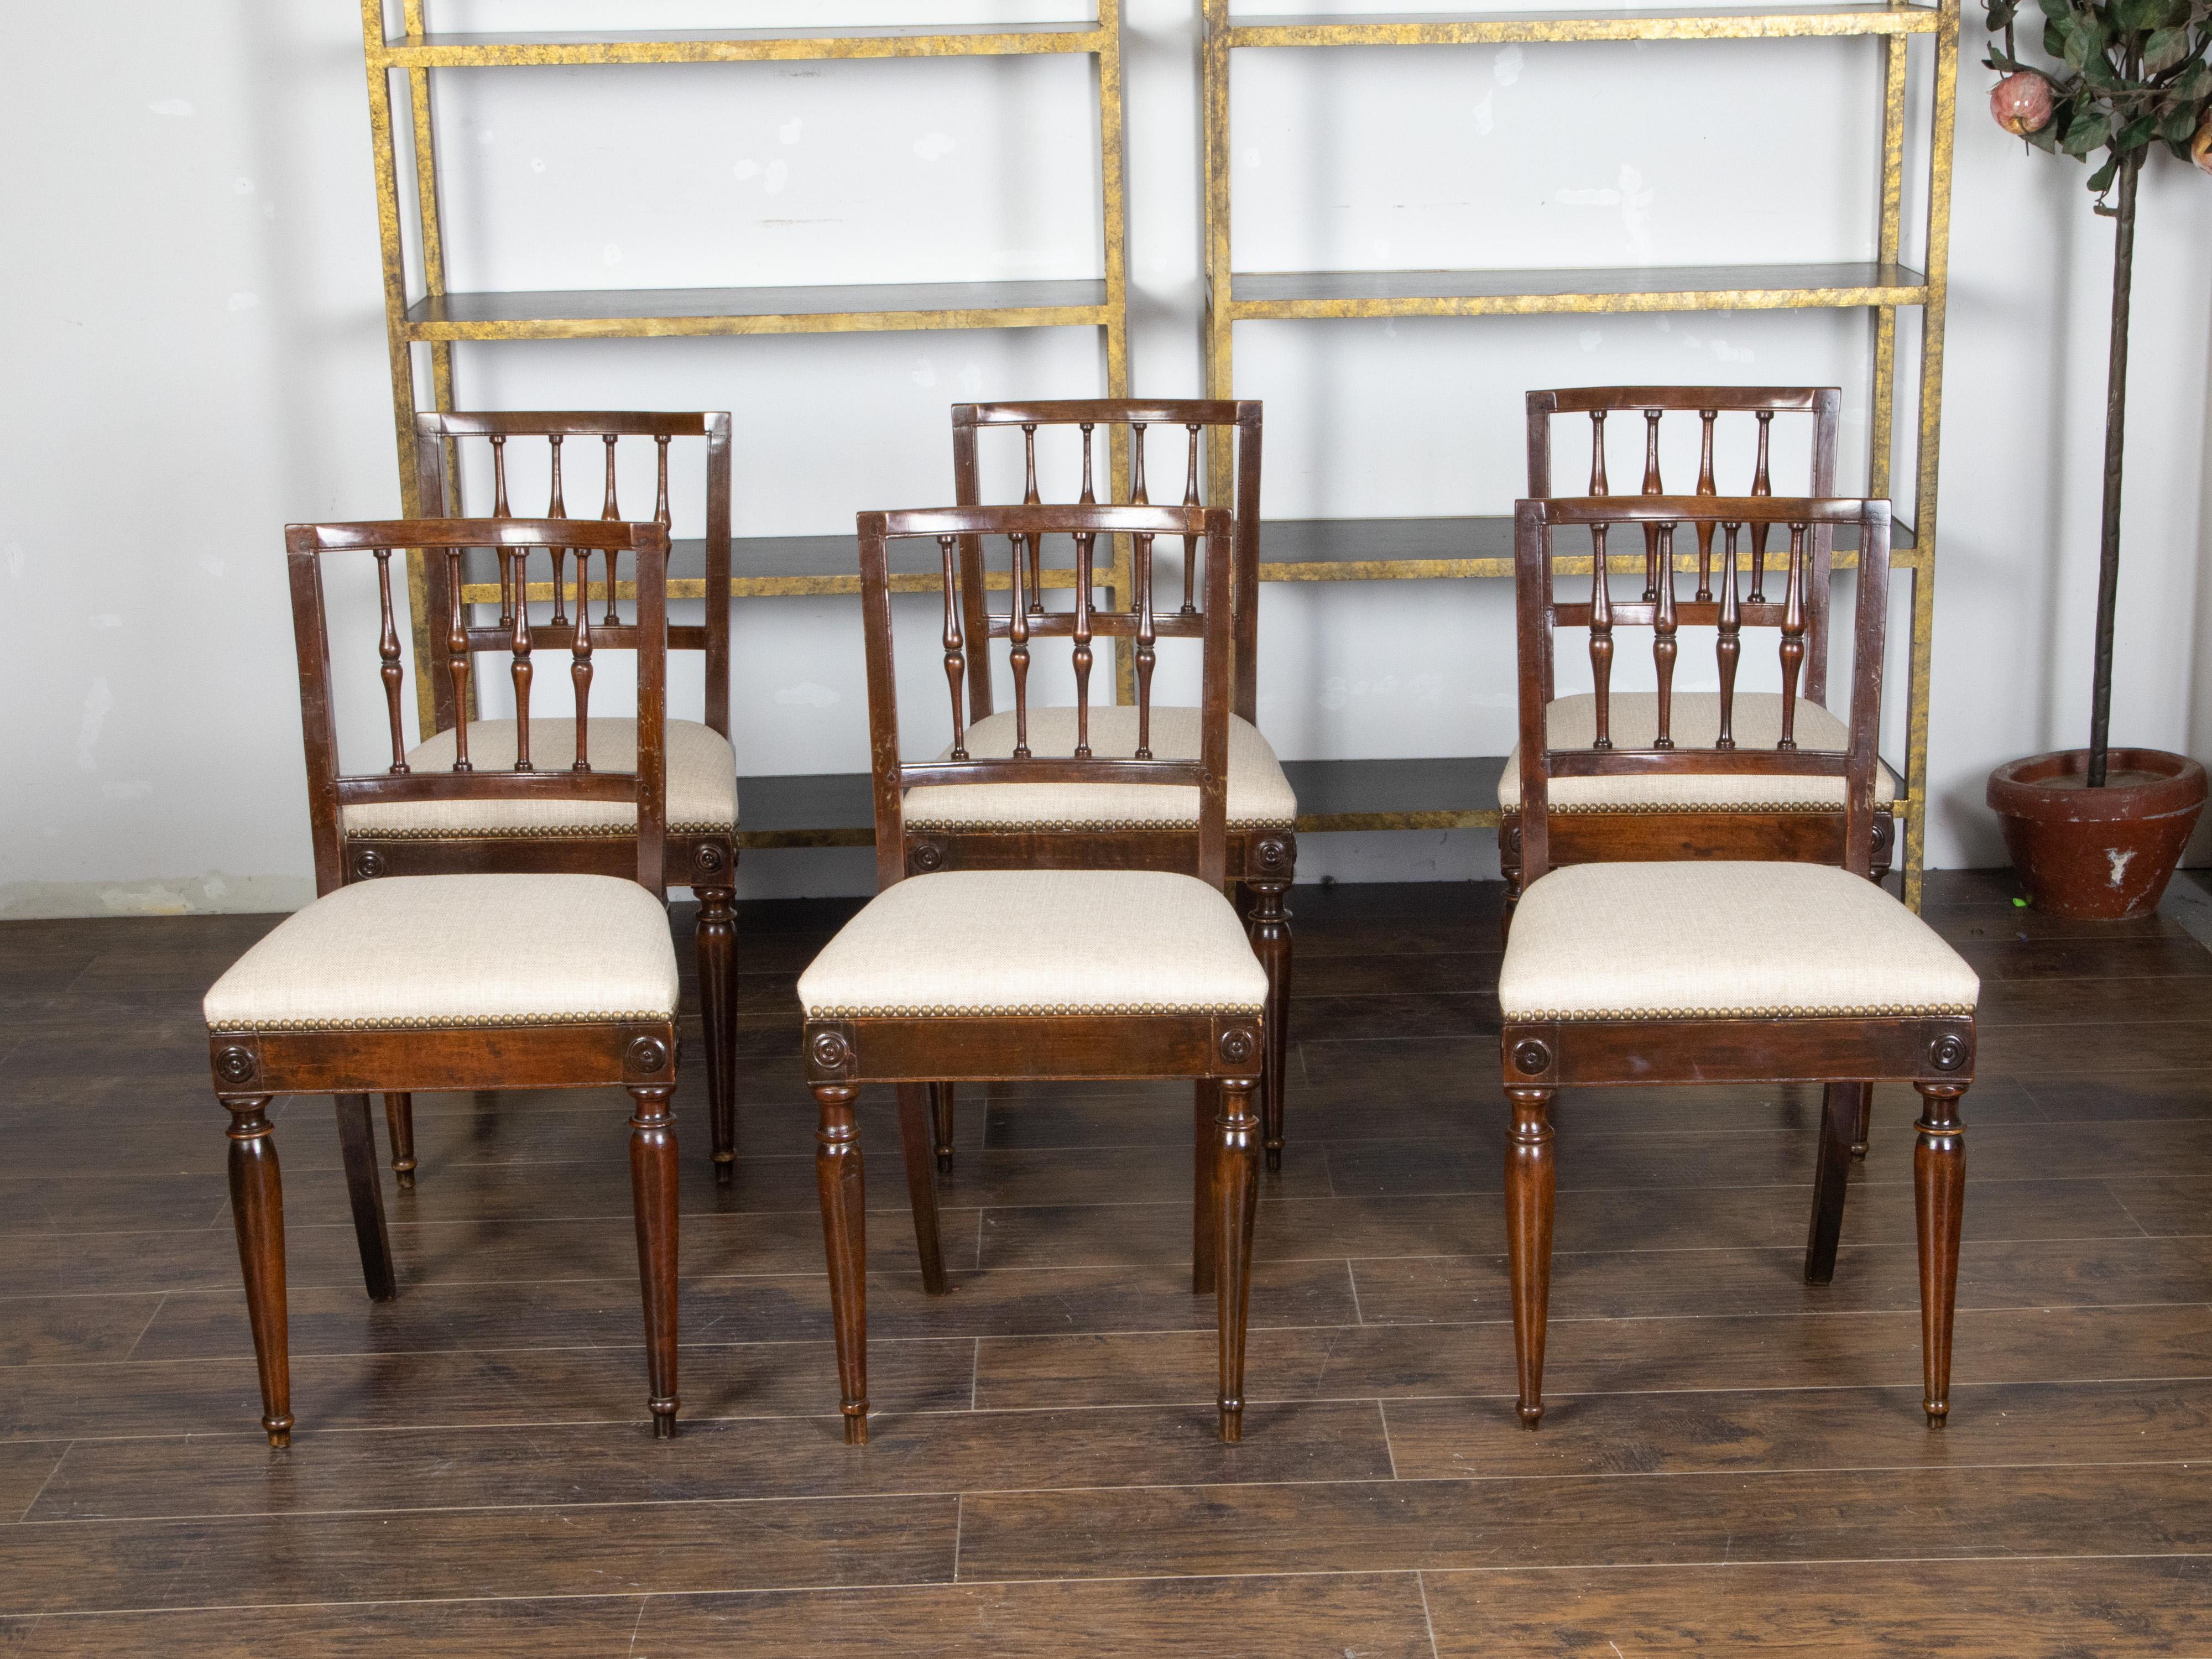 A set of six Italian walnut dining room chairs from the early 19th century, with spindle-shaped backs, carved medallions and new upholstery. Created in Italy during the early years of the 19th century, each of this set of walnut side chairs features